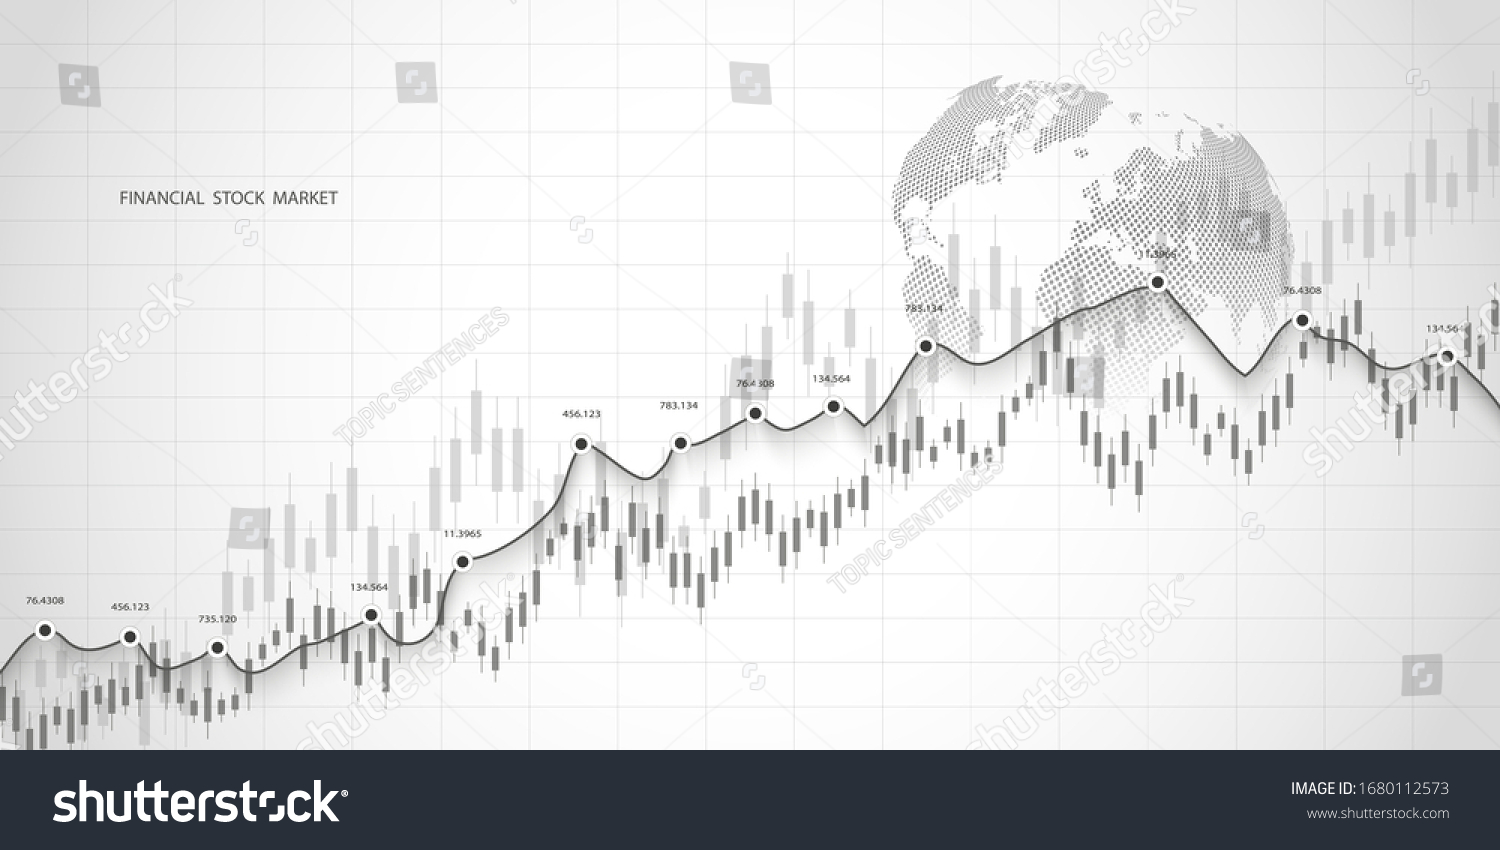 SVG of Stock market graph or forex trading chart for business and financial concepts, reports and investment on grey background . Vector illustration svg